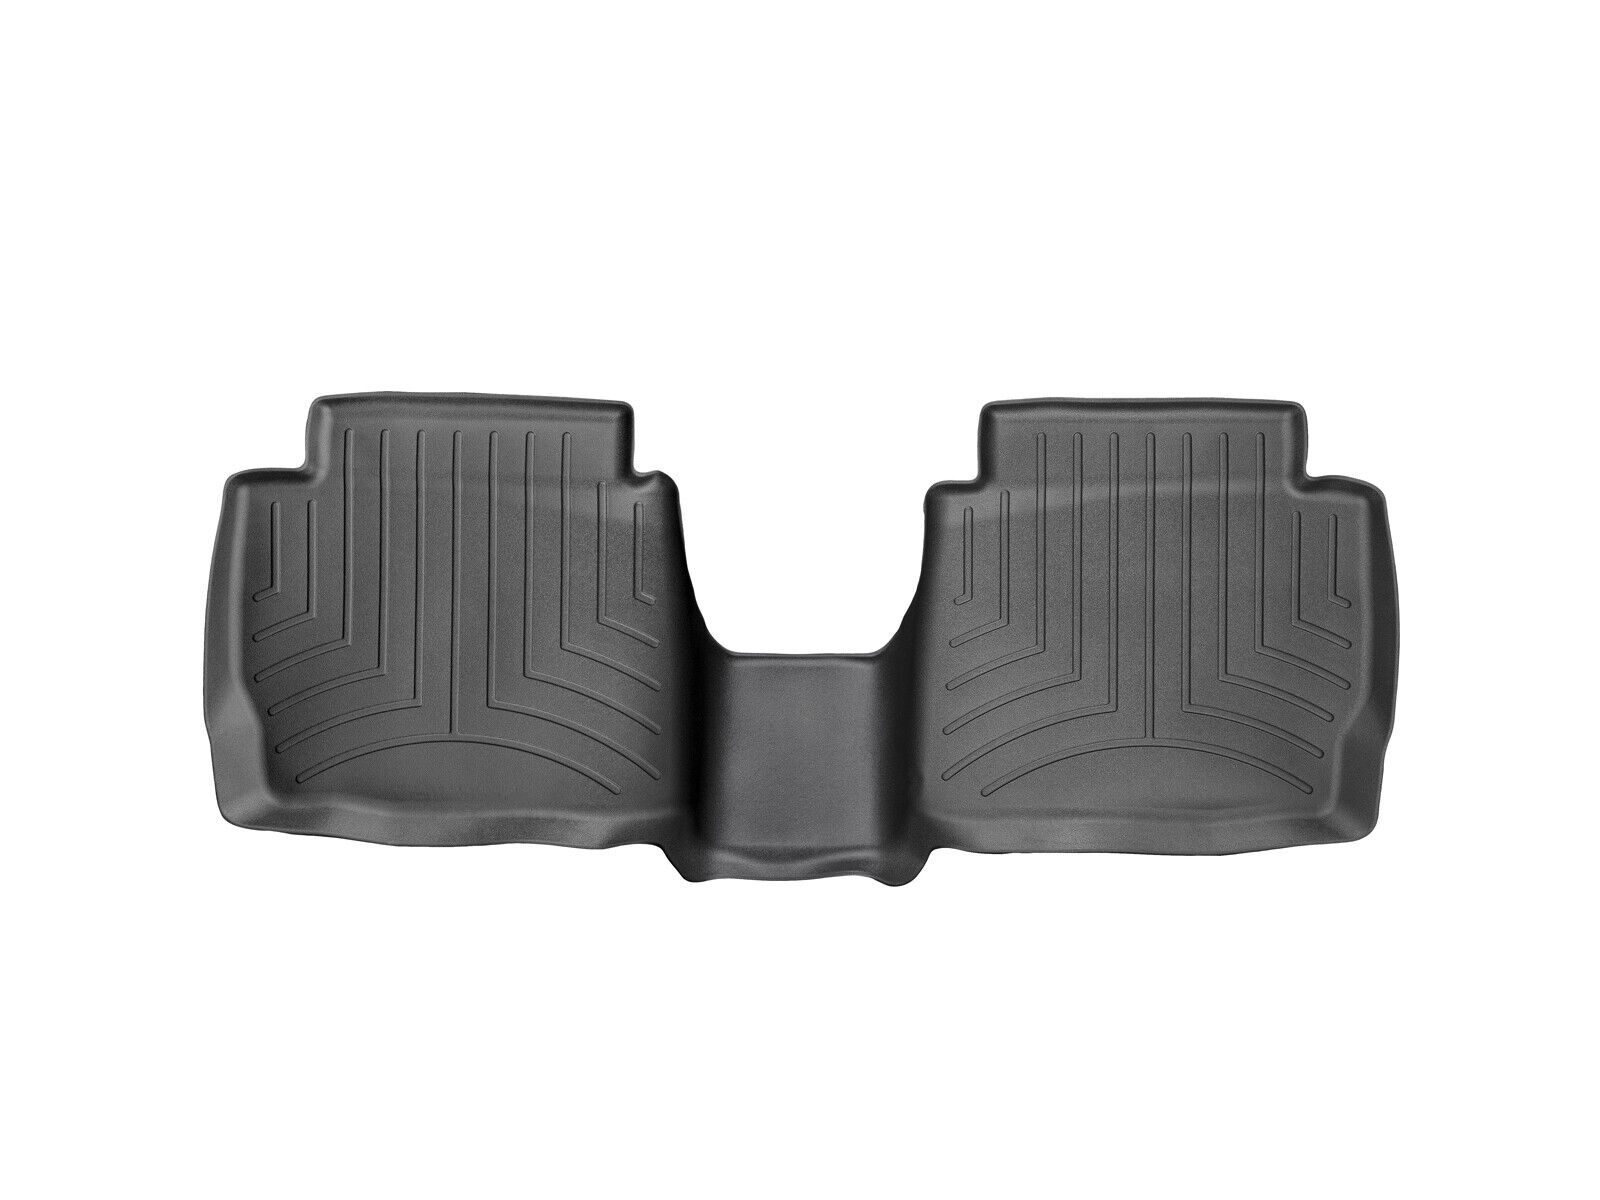 WeatherTech FloorLiners for 2013-2020 Ford Fusion/Lincoln MKZ - 2nd Row, Black